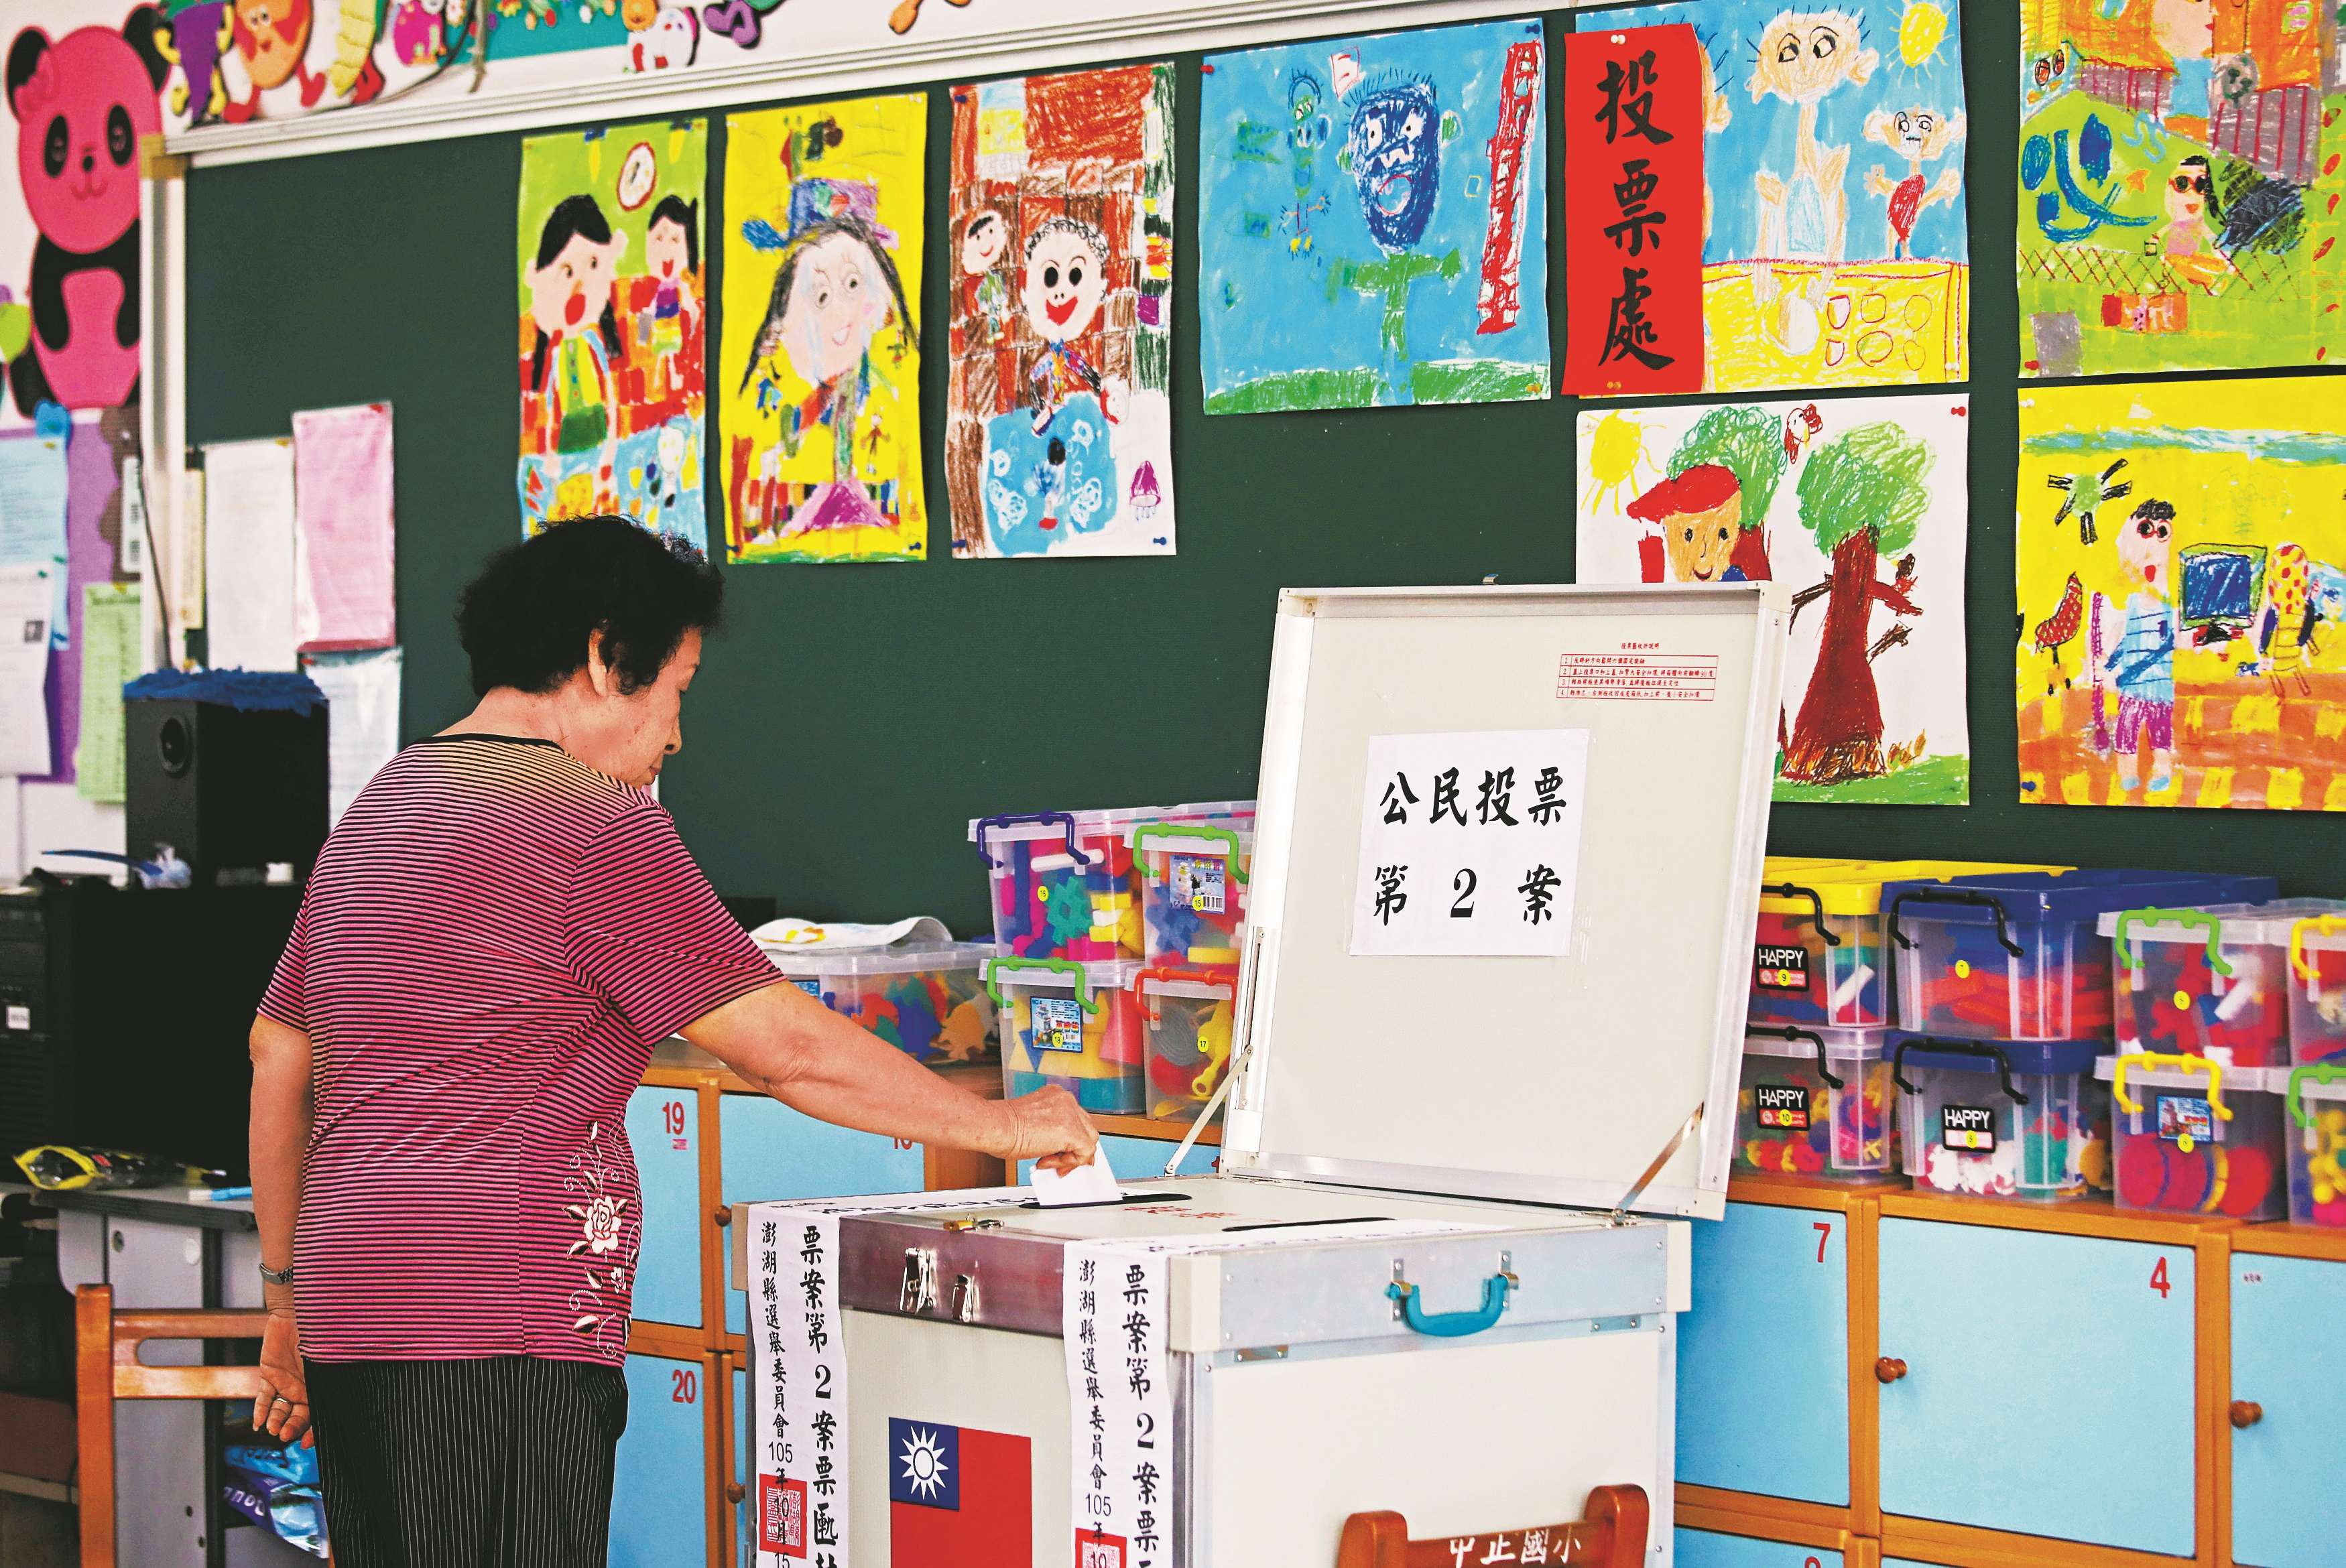 A woman casts her ballot at a polling station in the referendum on Penghu on Saturday. Photo: Reuters